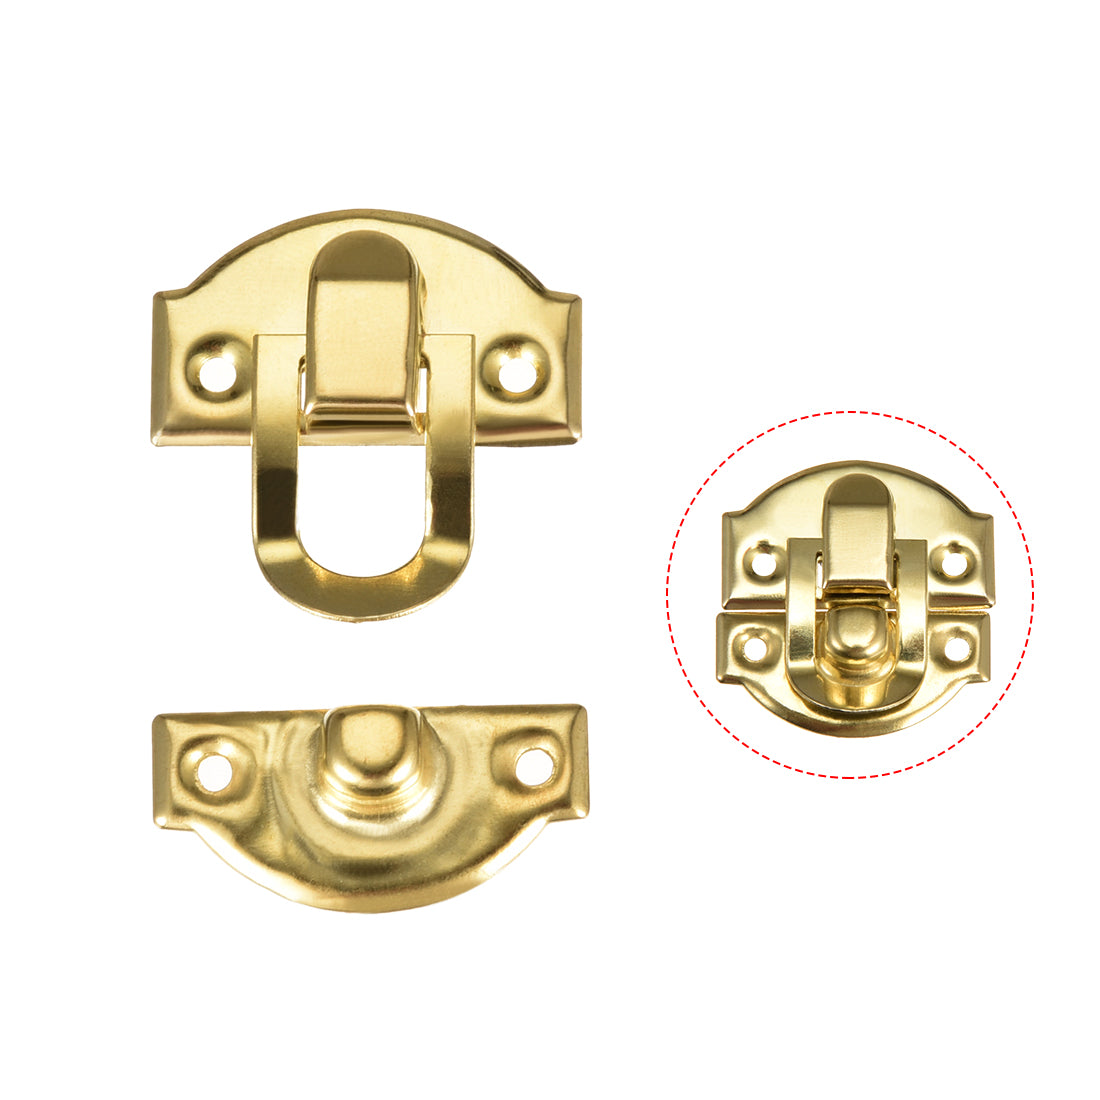 uxcell Uxcell Box Latch, Retro Style Small Size Golden Decorative Hasp Jewelry cases Catch w Screws 10 pcs